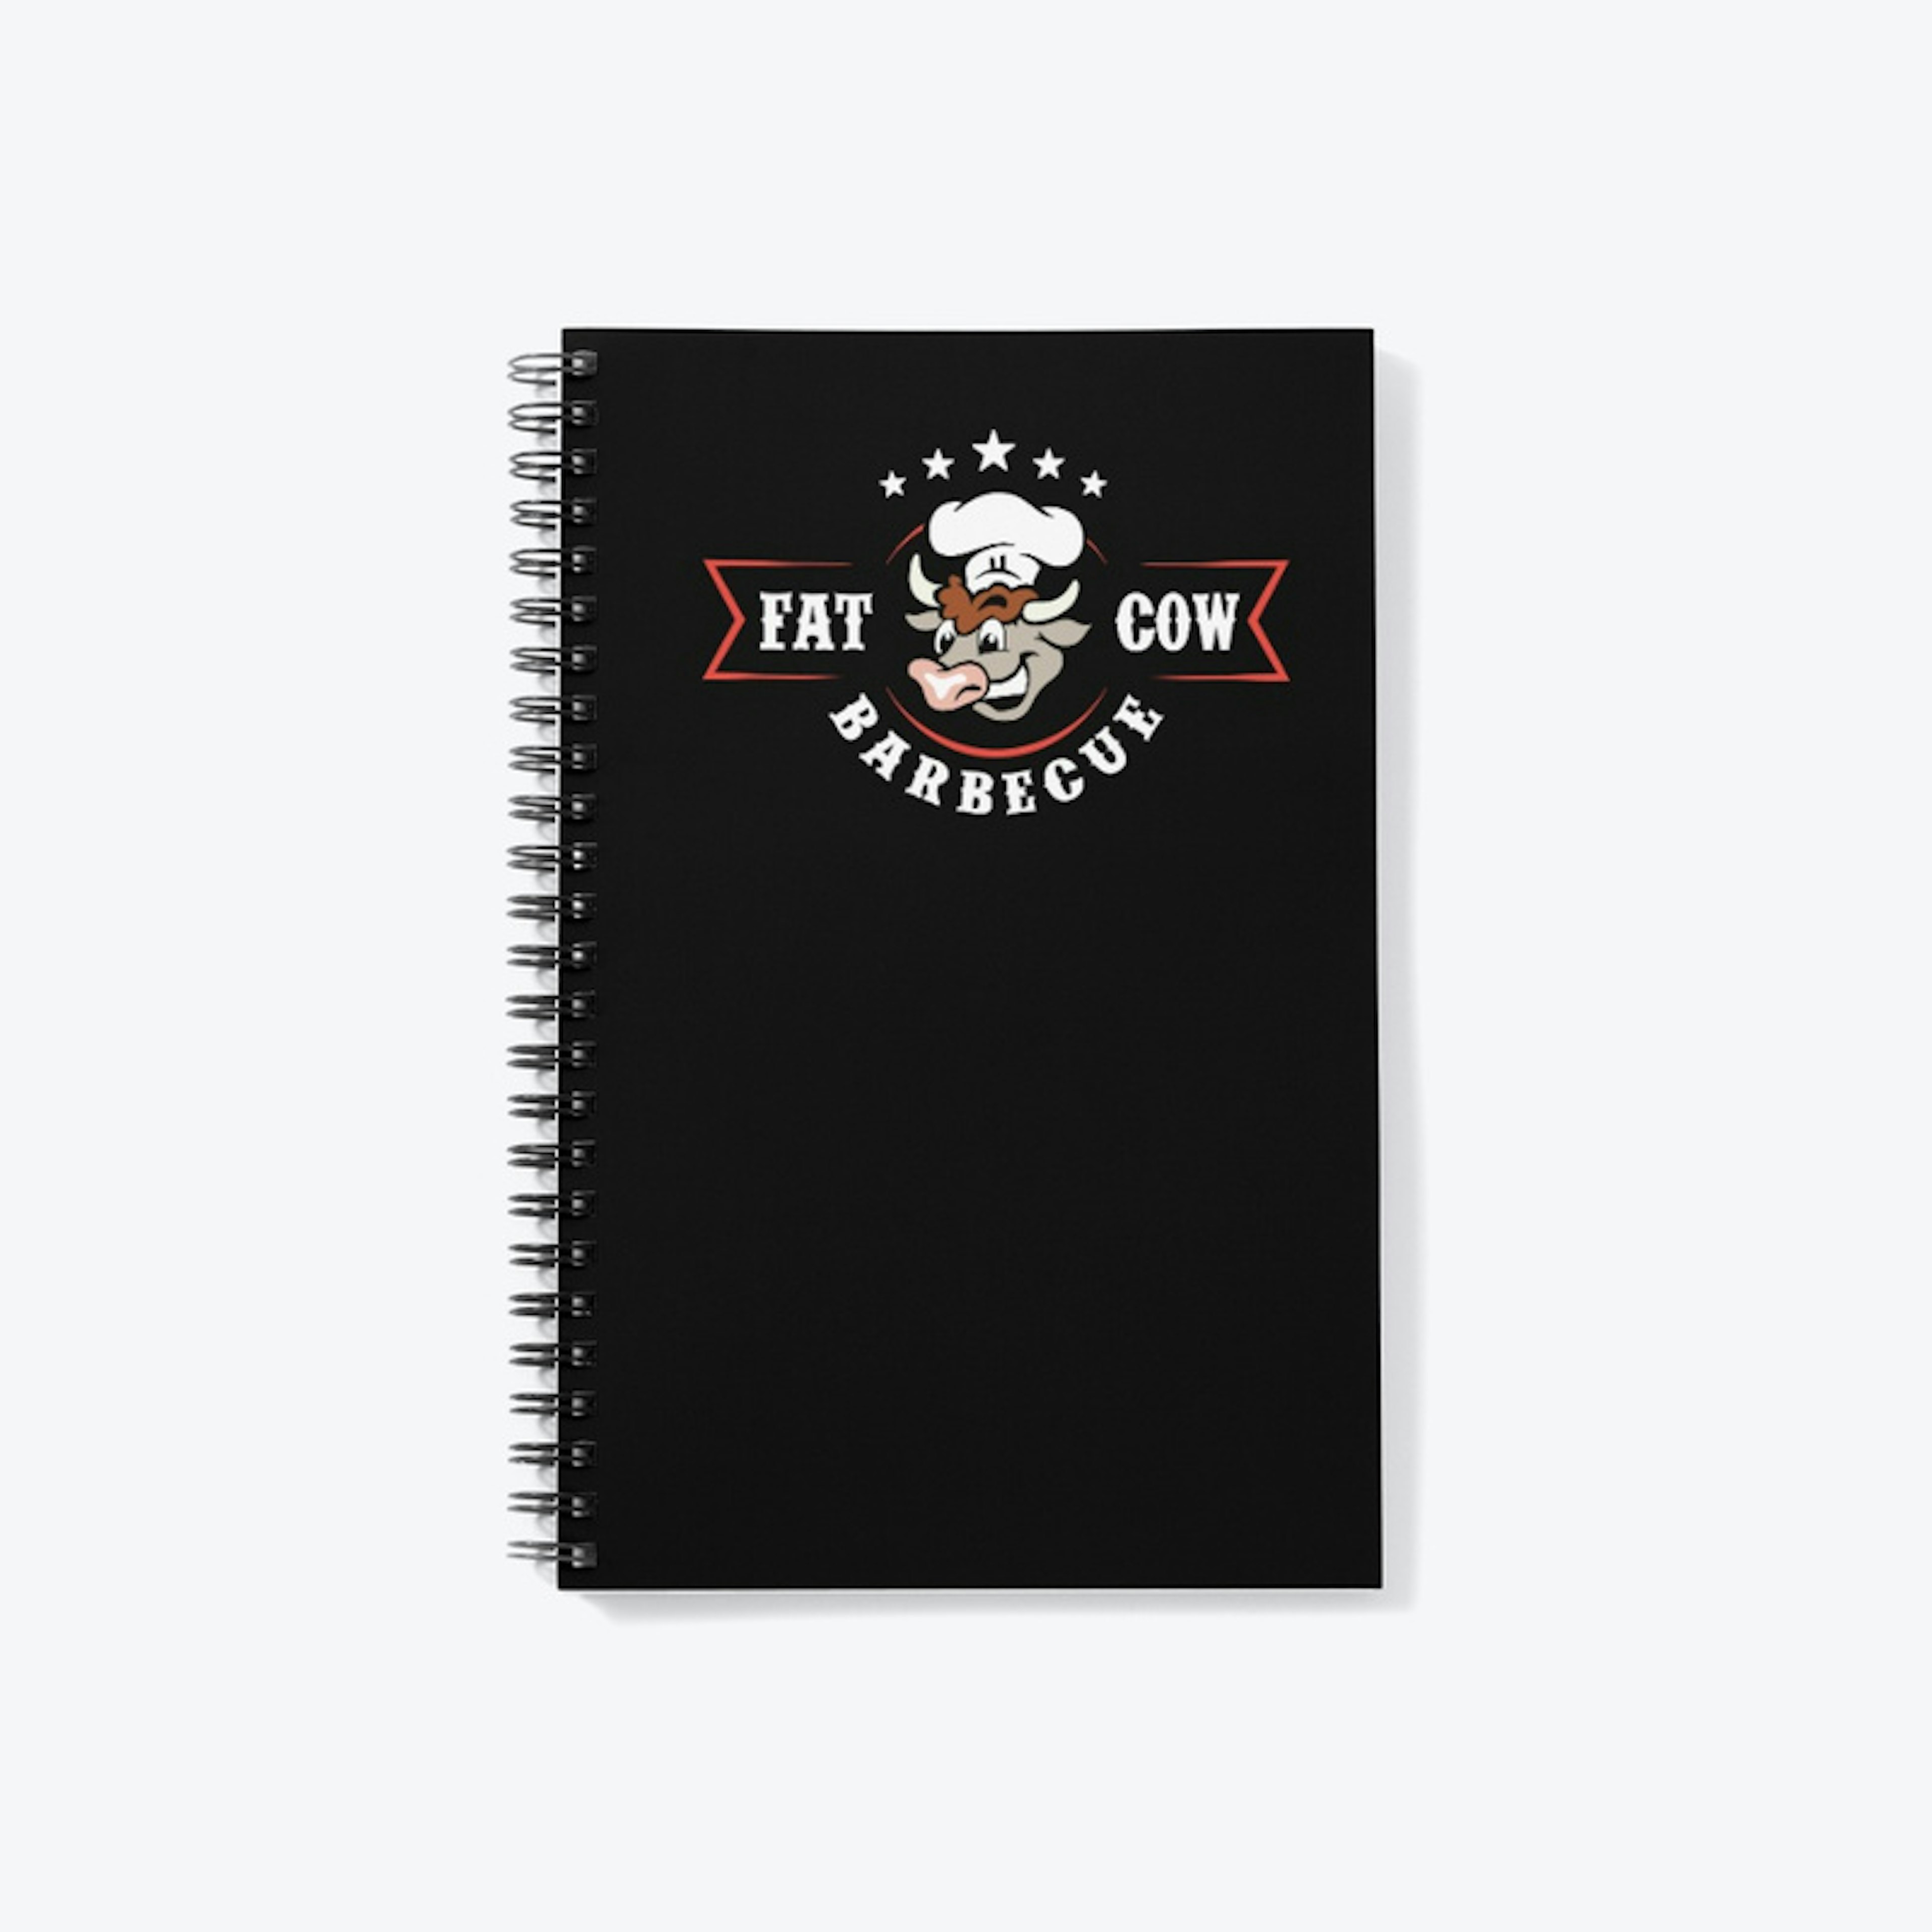 Fat Cow Barbecue Notebook